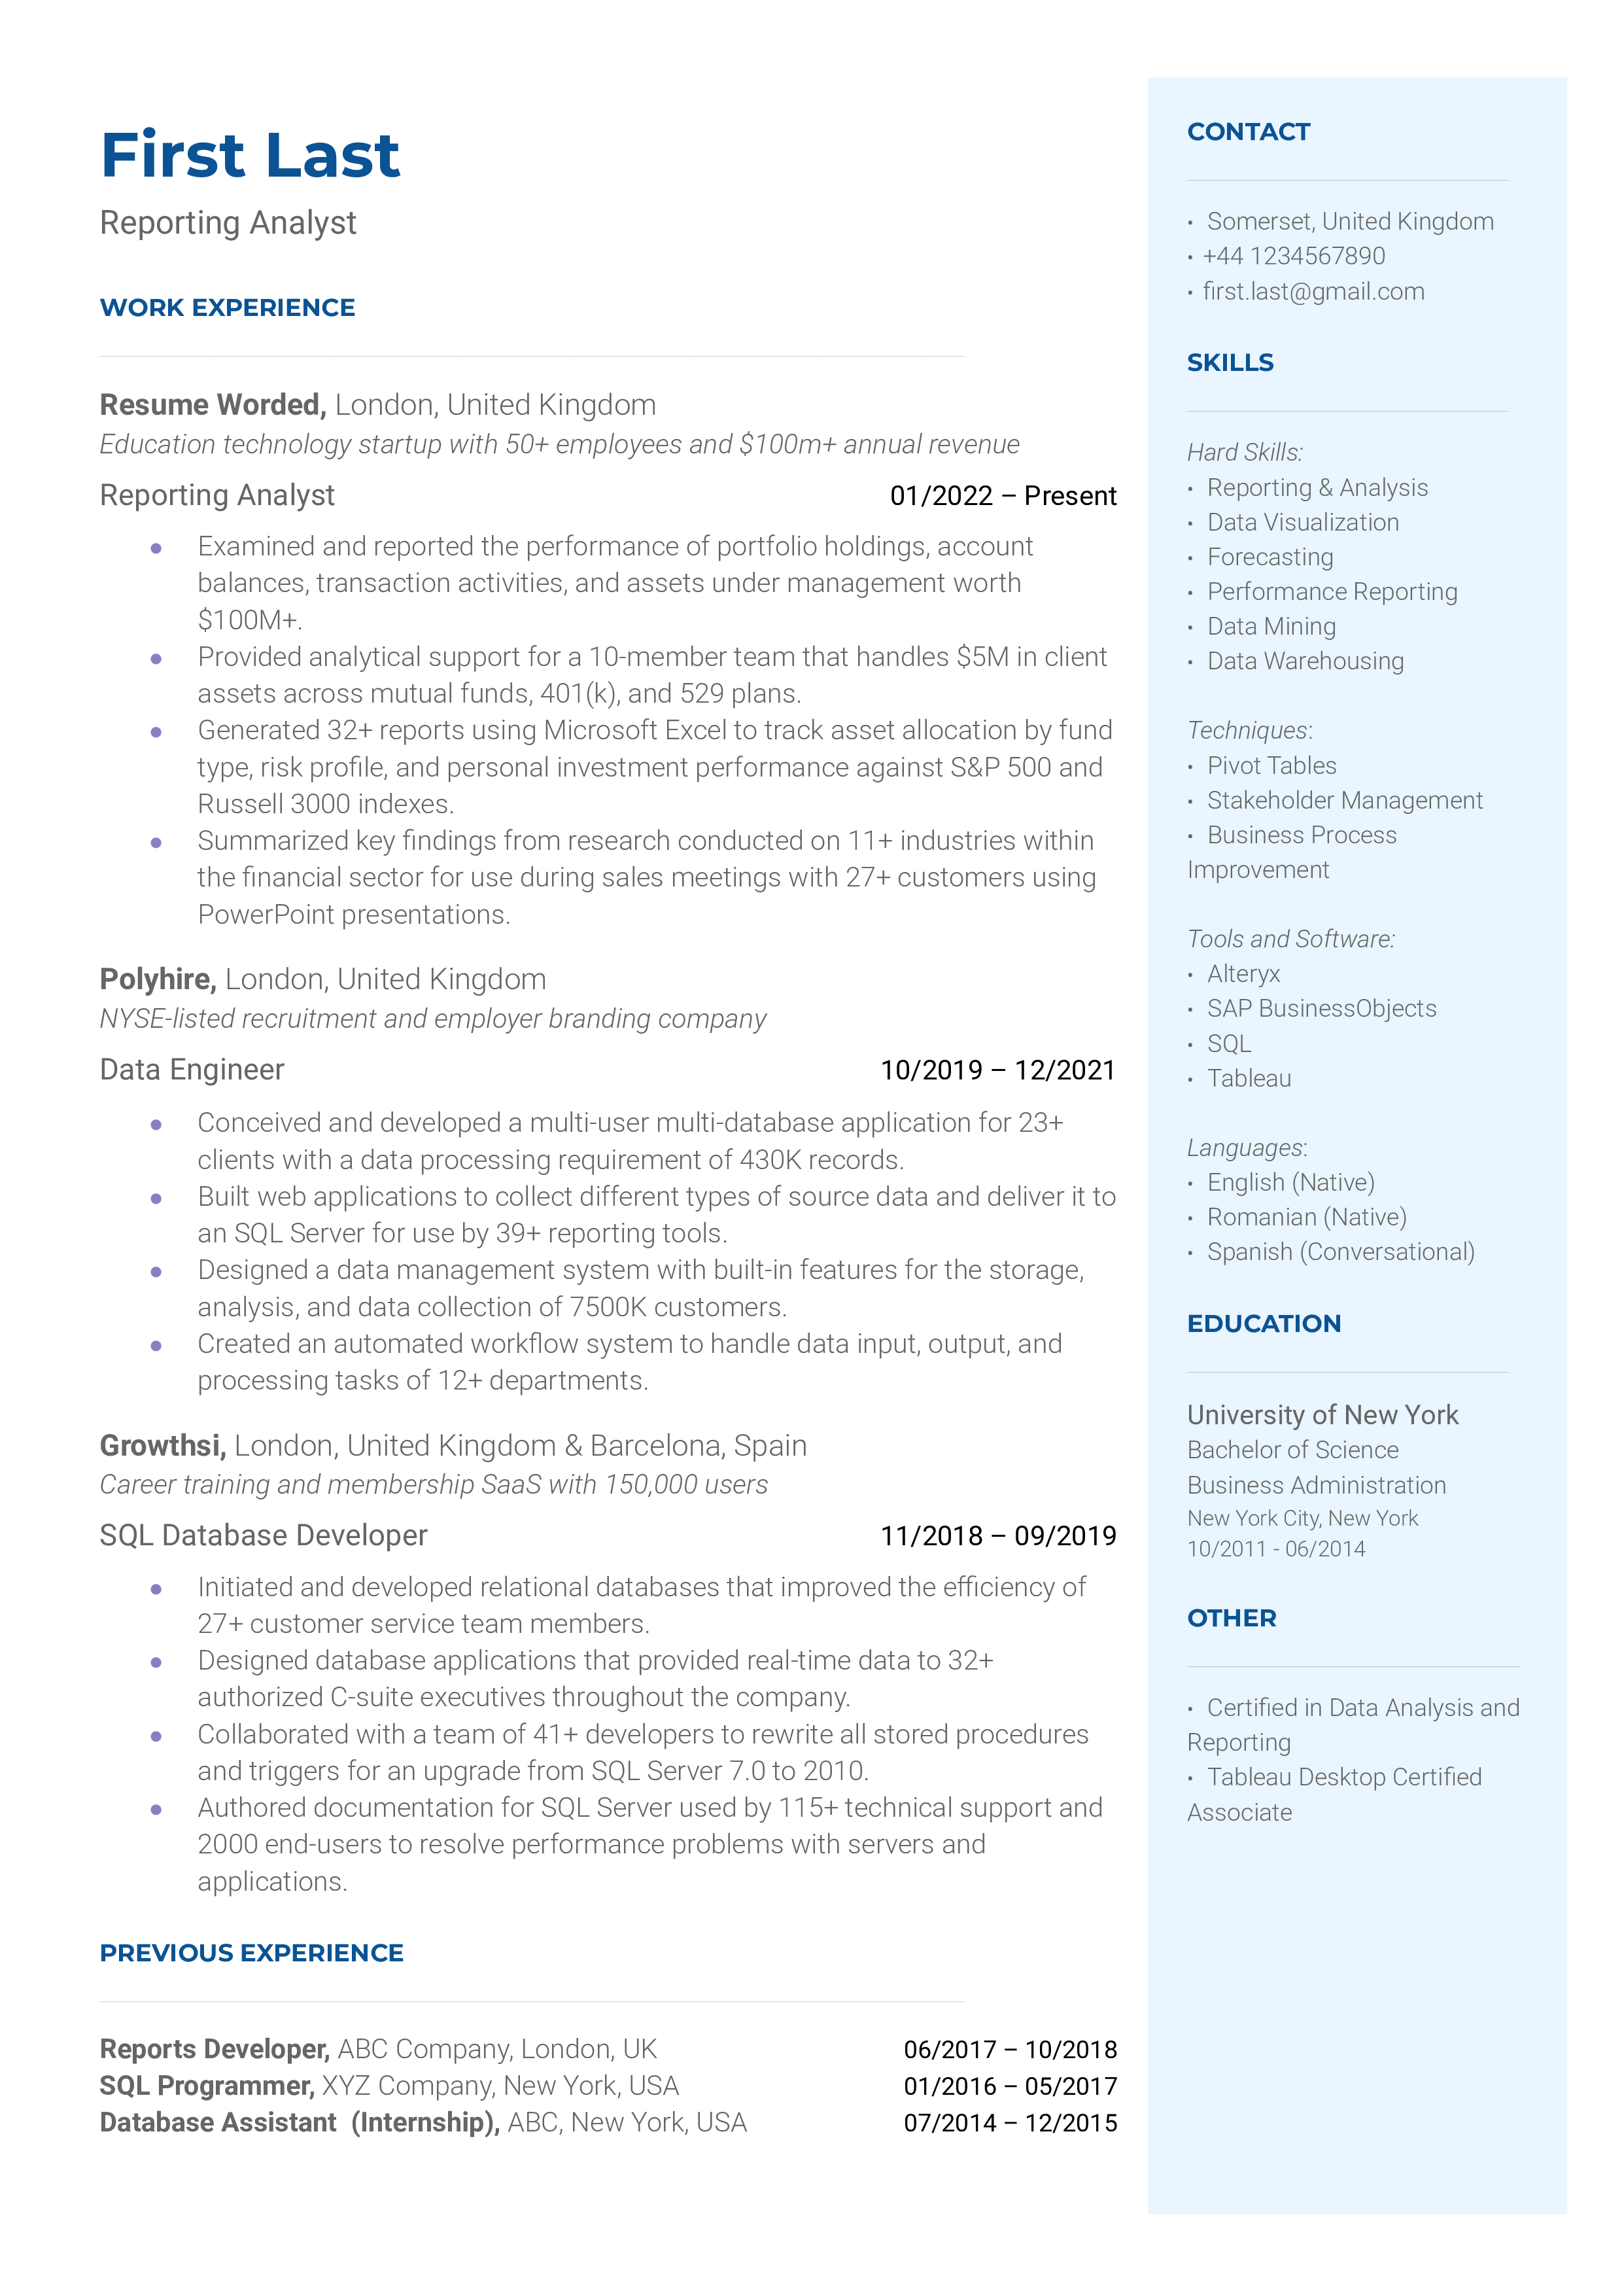 A reporting analyst resume template using relevant keywords.